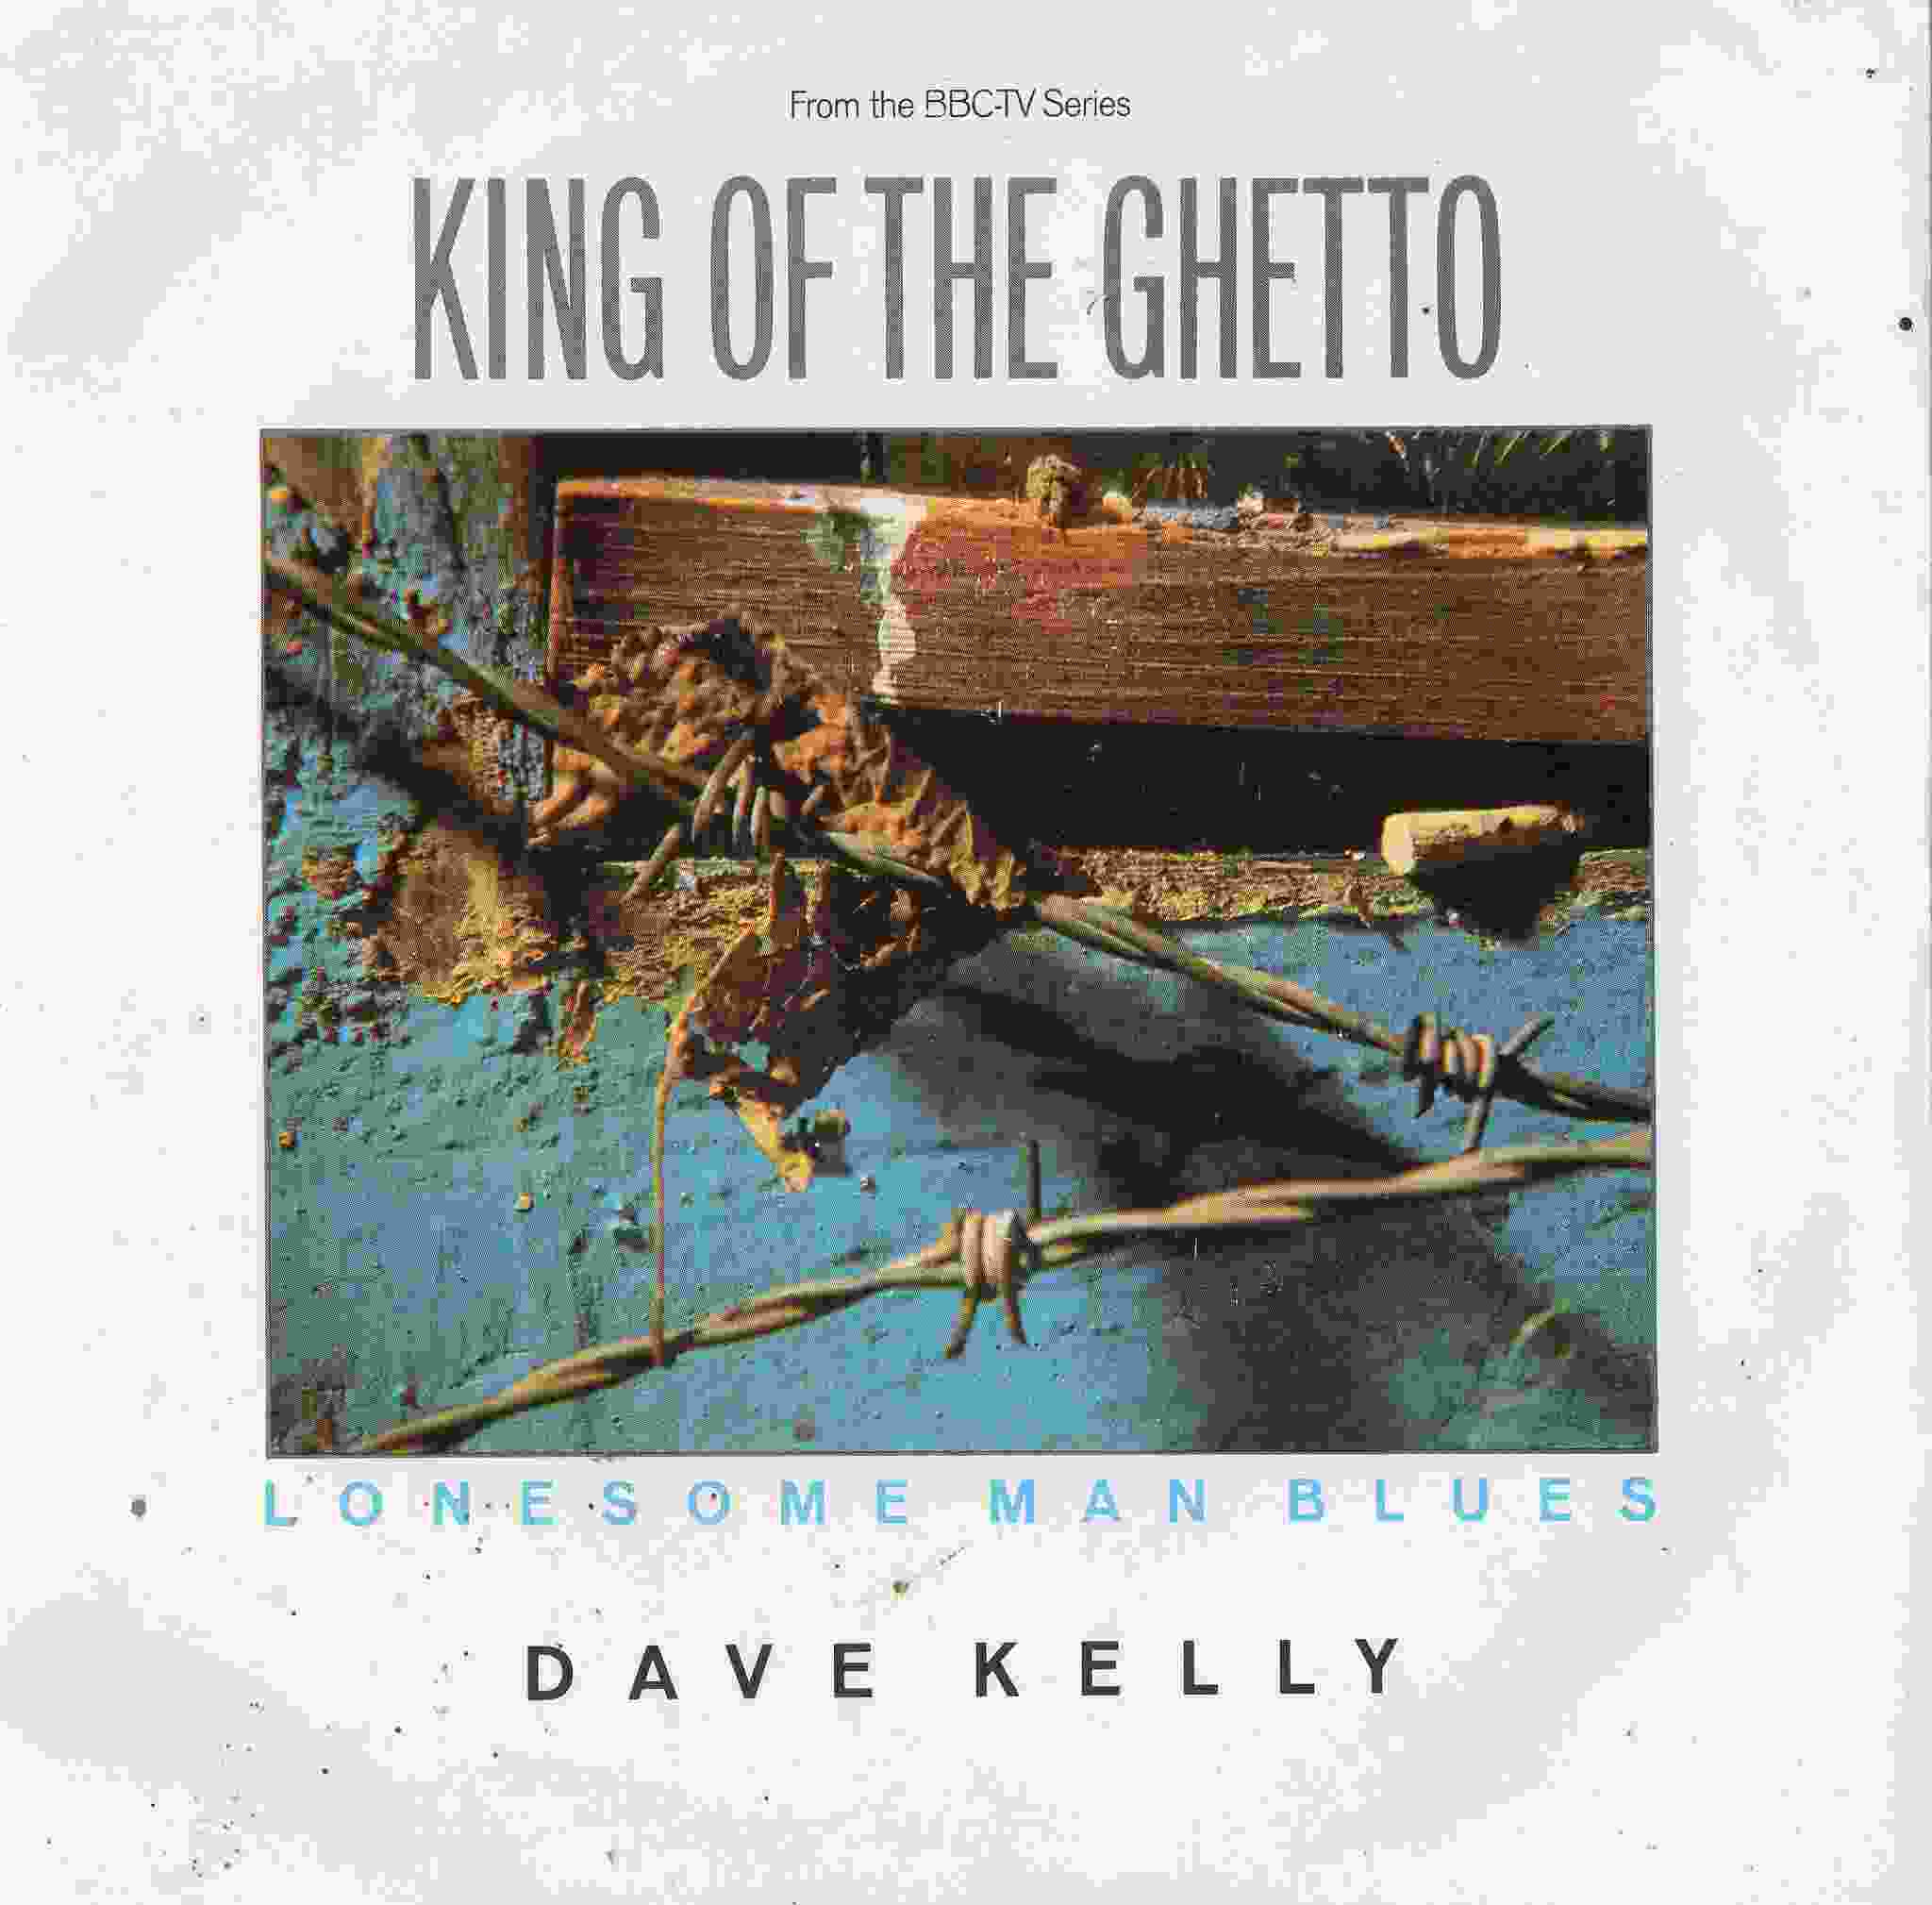 Picture of RESL 188 Lonesome man blues (King of the ghetto) by artist Dave Kelly from the BBC records and Tapes library